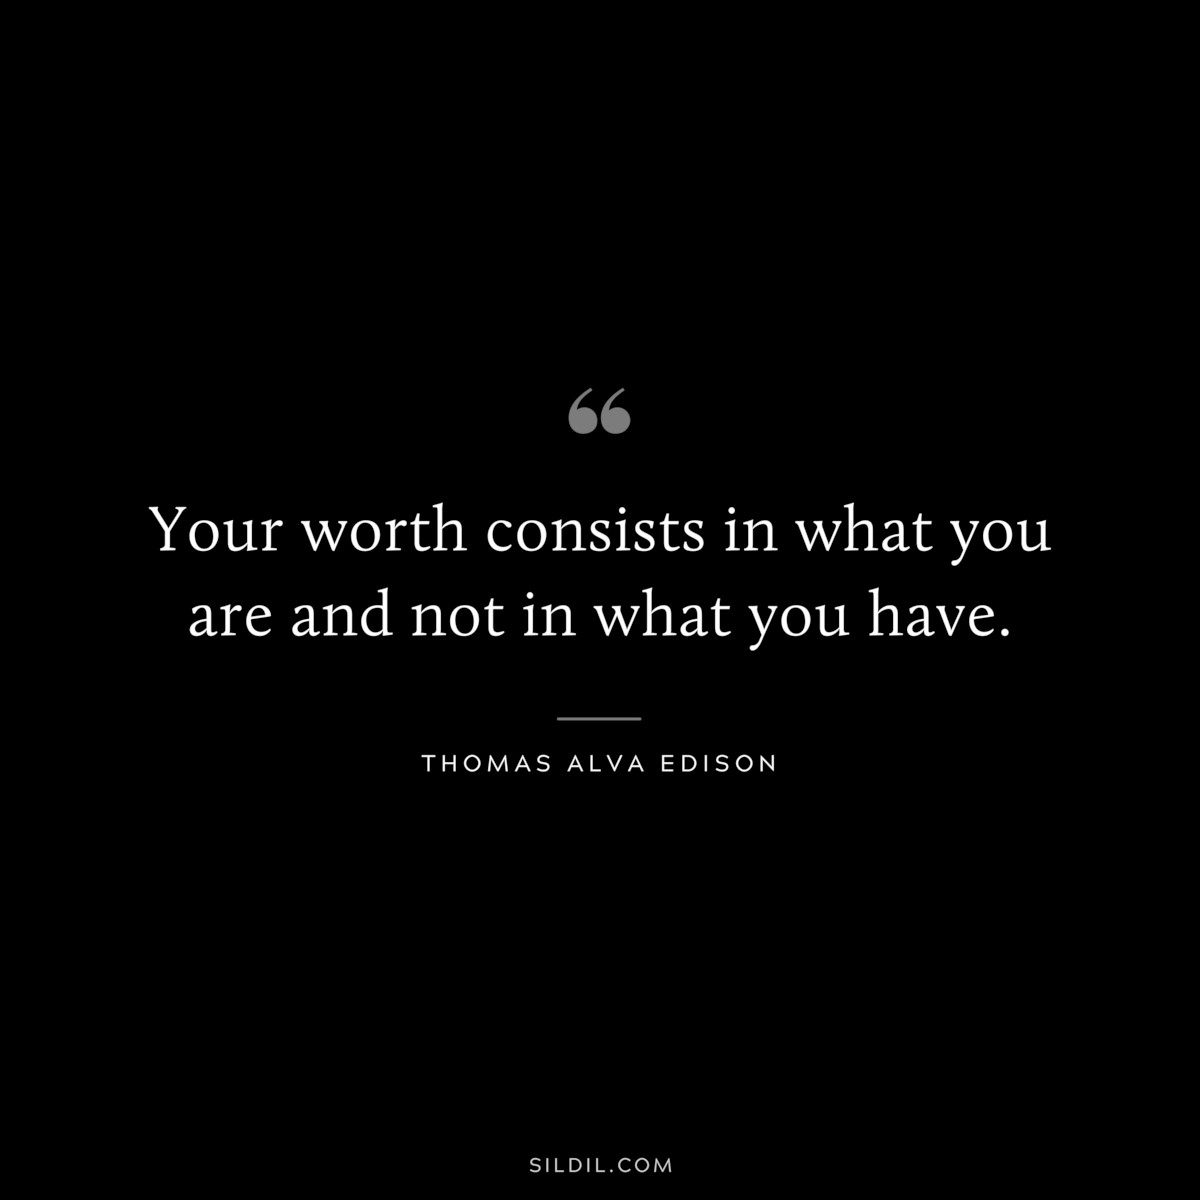 Your worth consists in what you are and not in what you have. ― Thomas Alva Edison